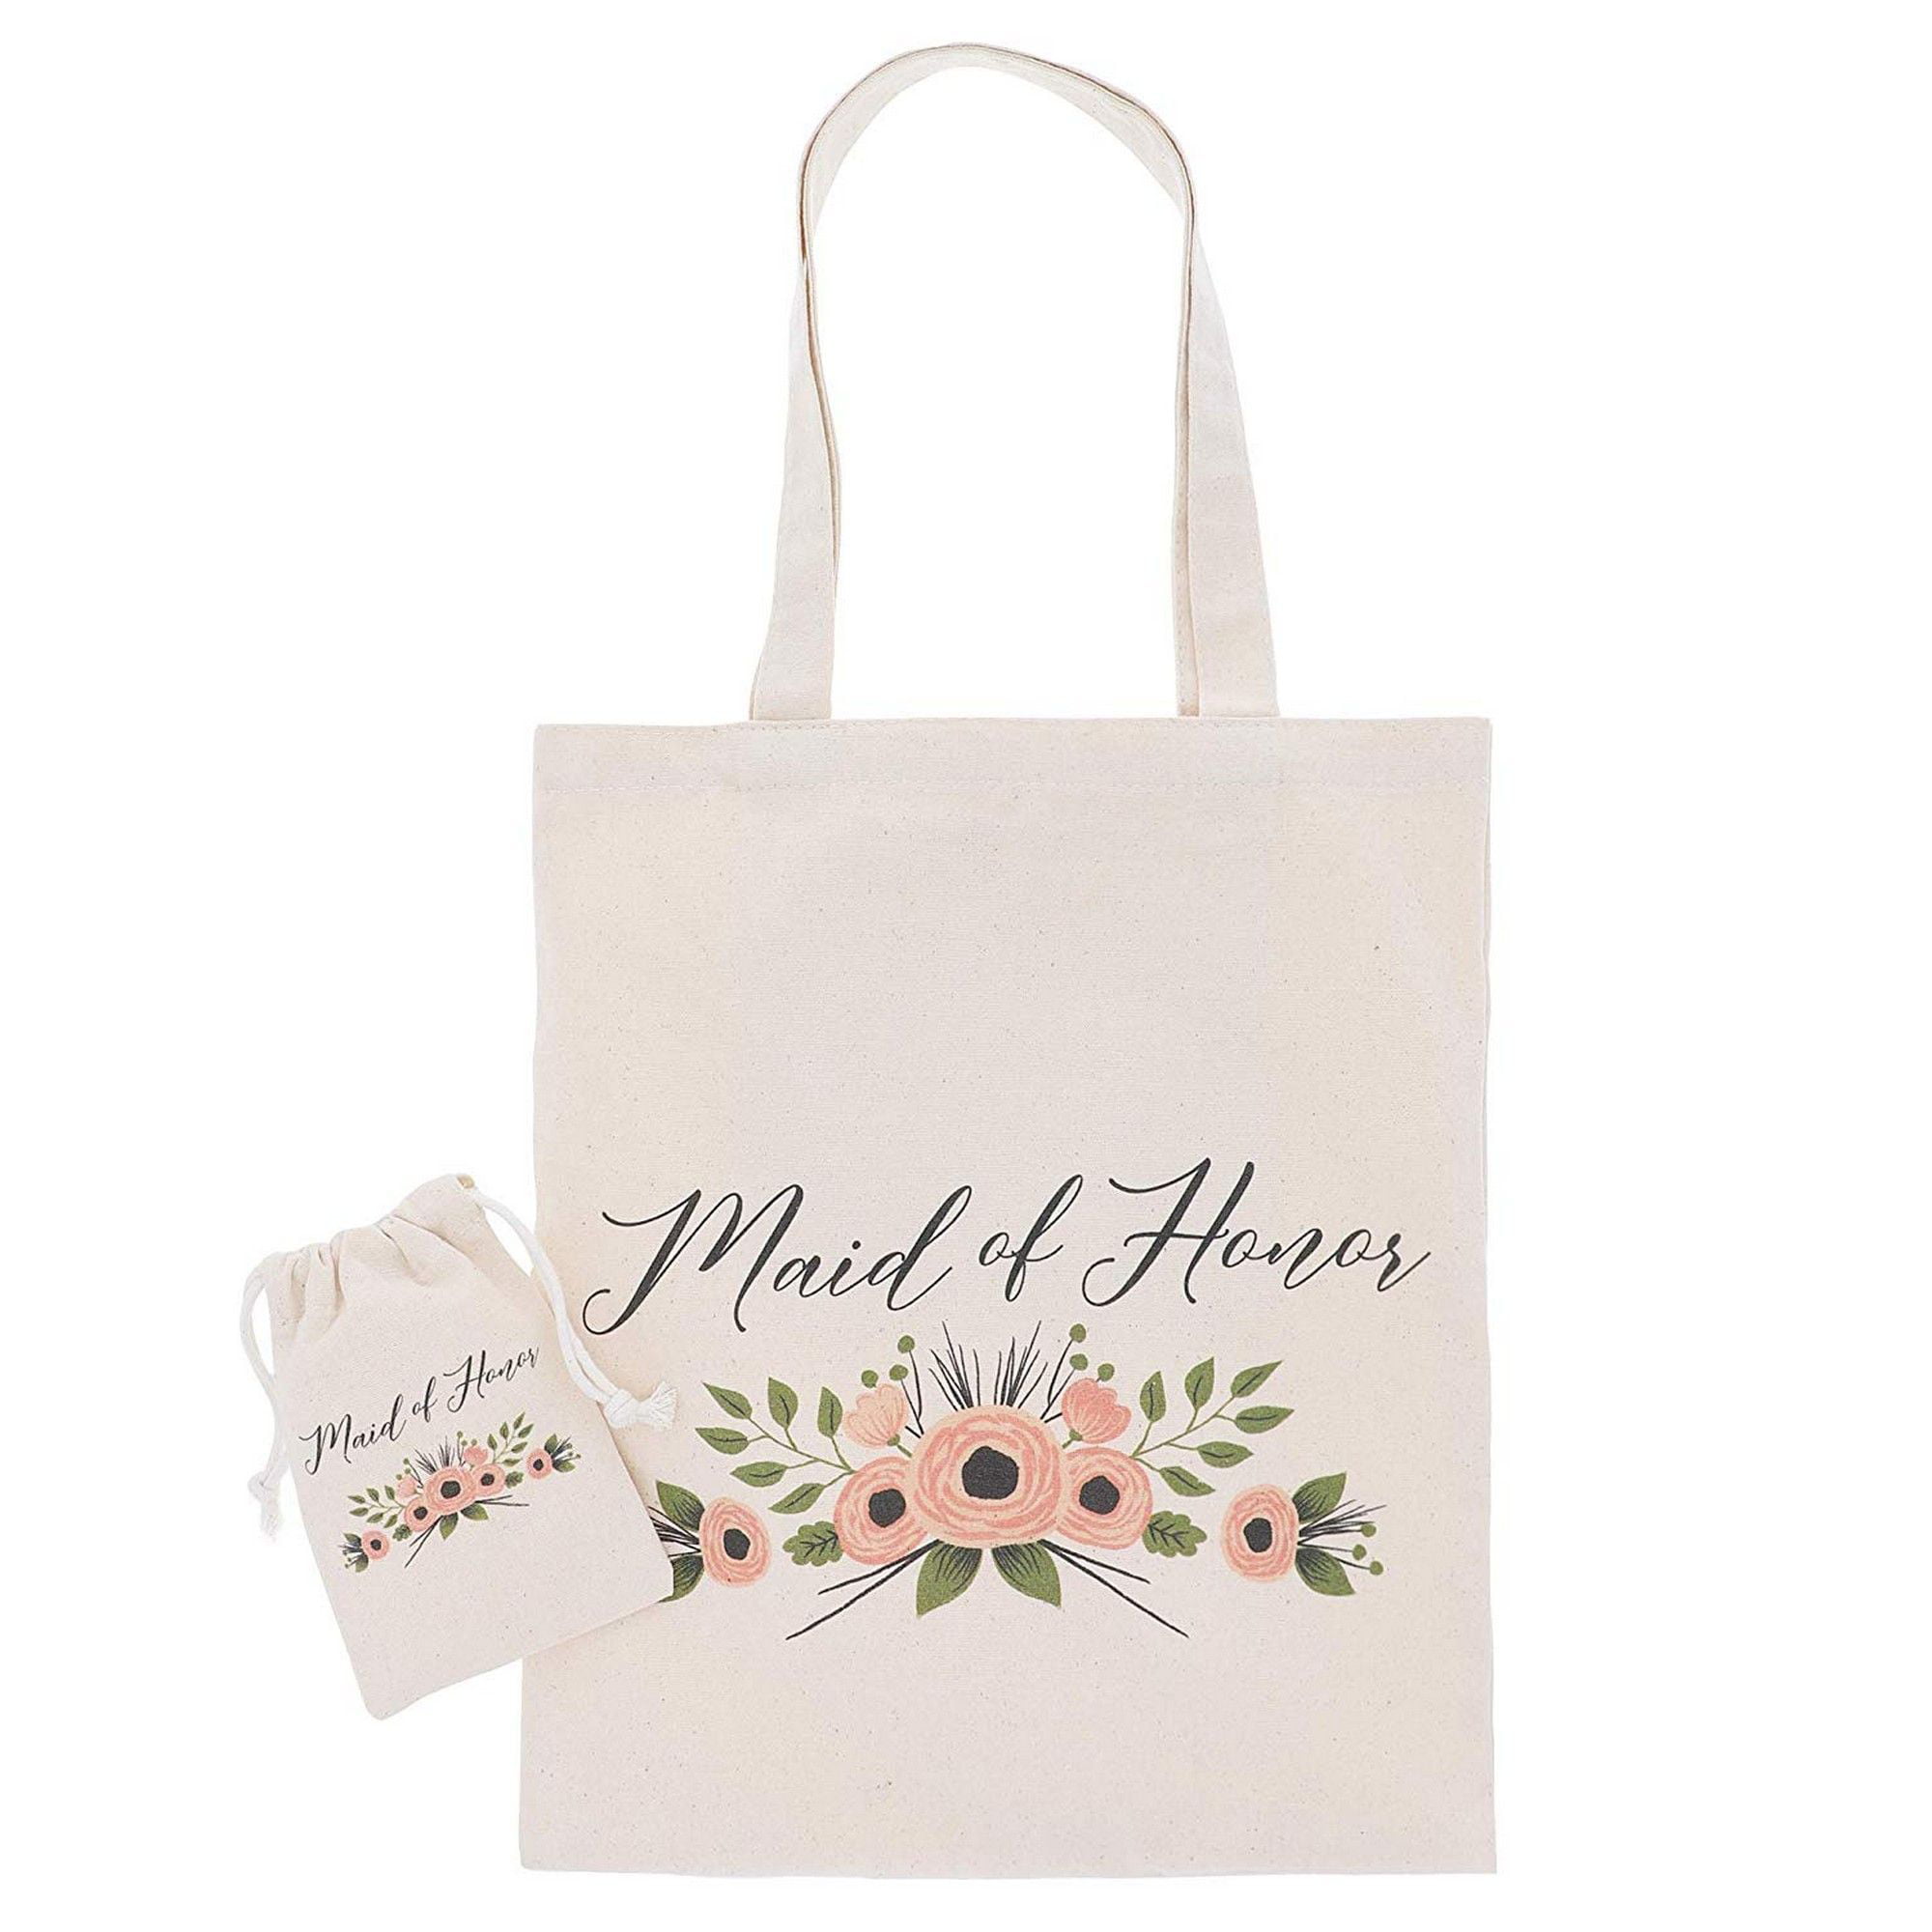 Maid of Honor Gift Set - 1 Cotton Canvas Tote Bag and 1 Drawstring ...